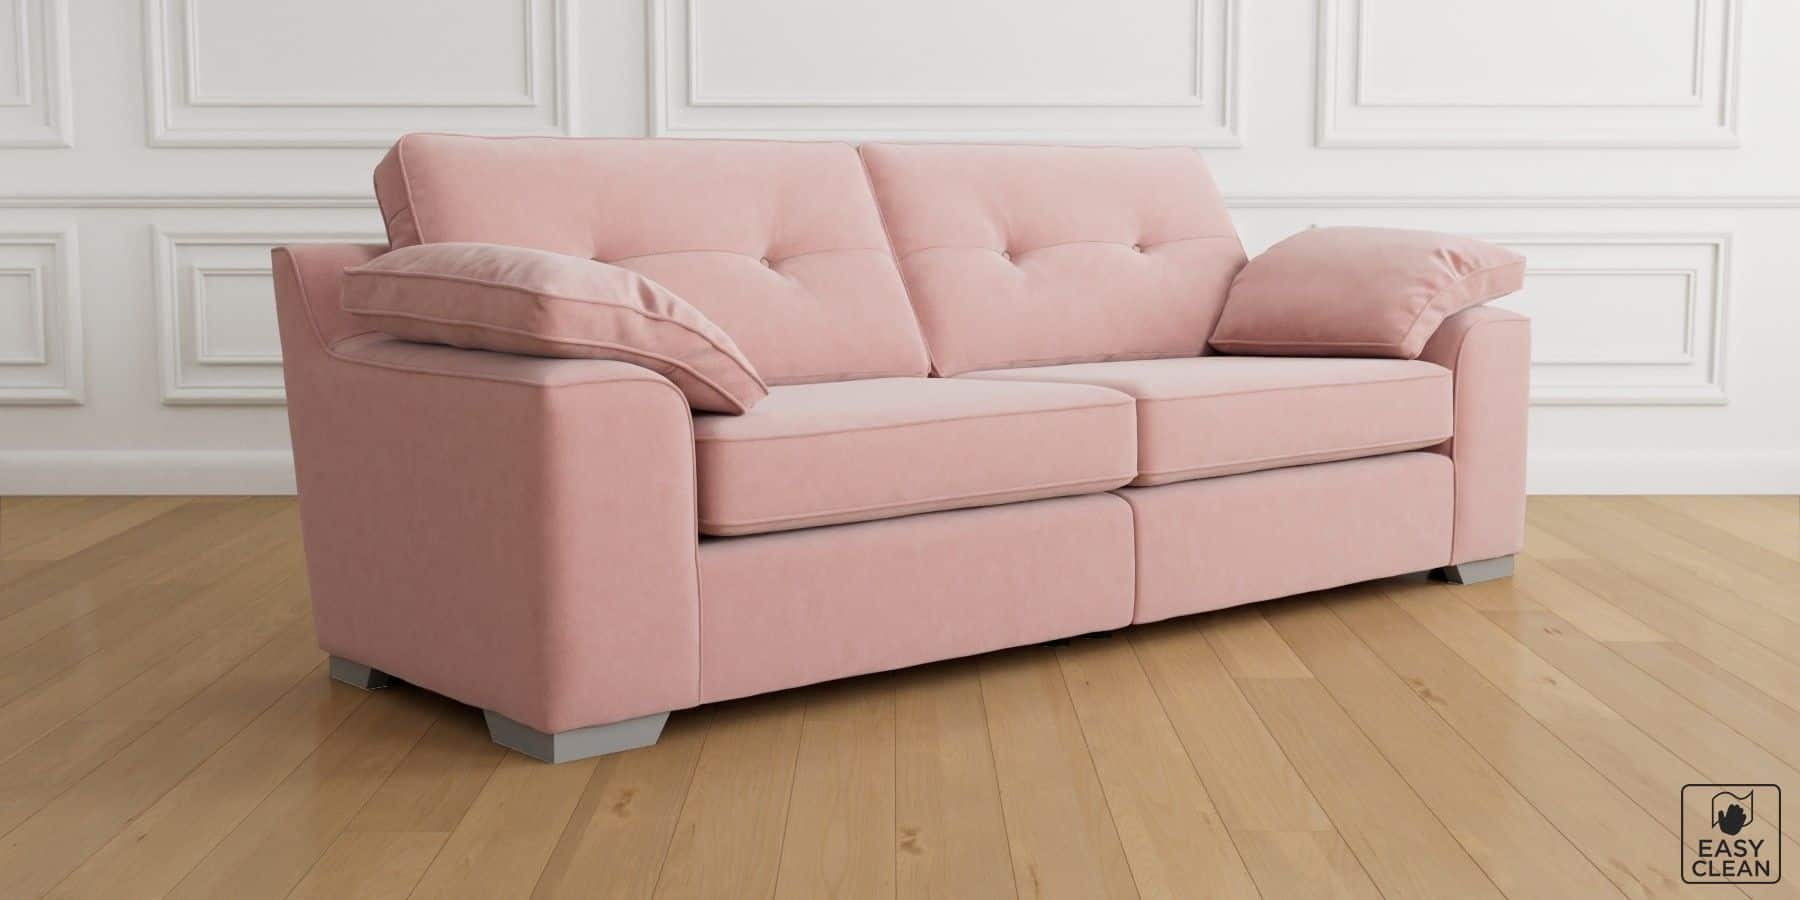 21 Blush Pink Sofas and Creative Ways to Decorate Them